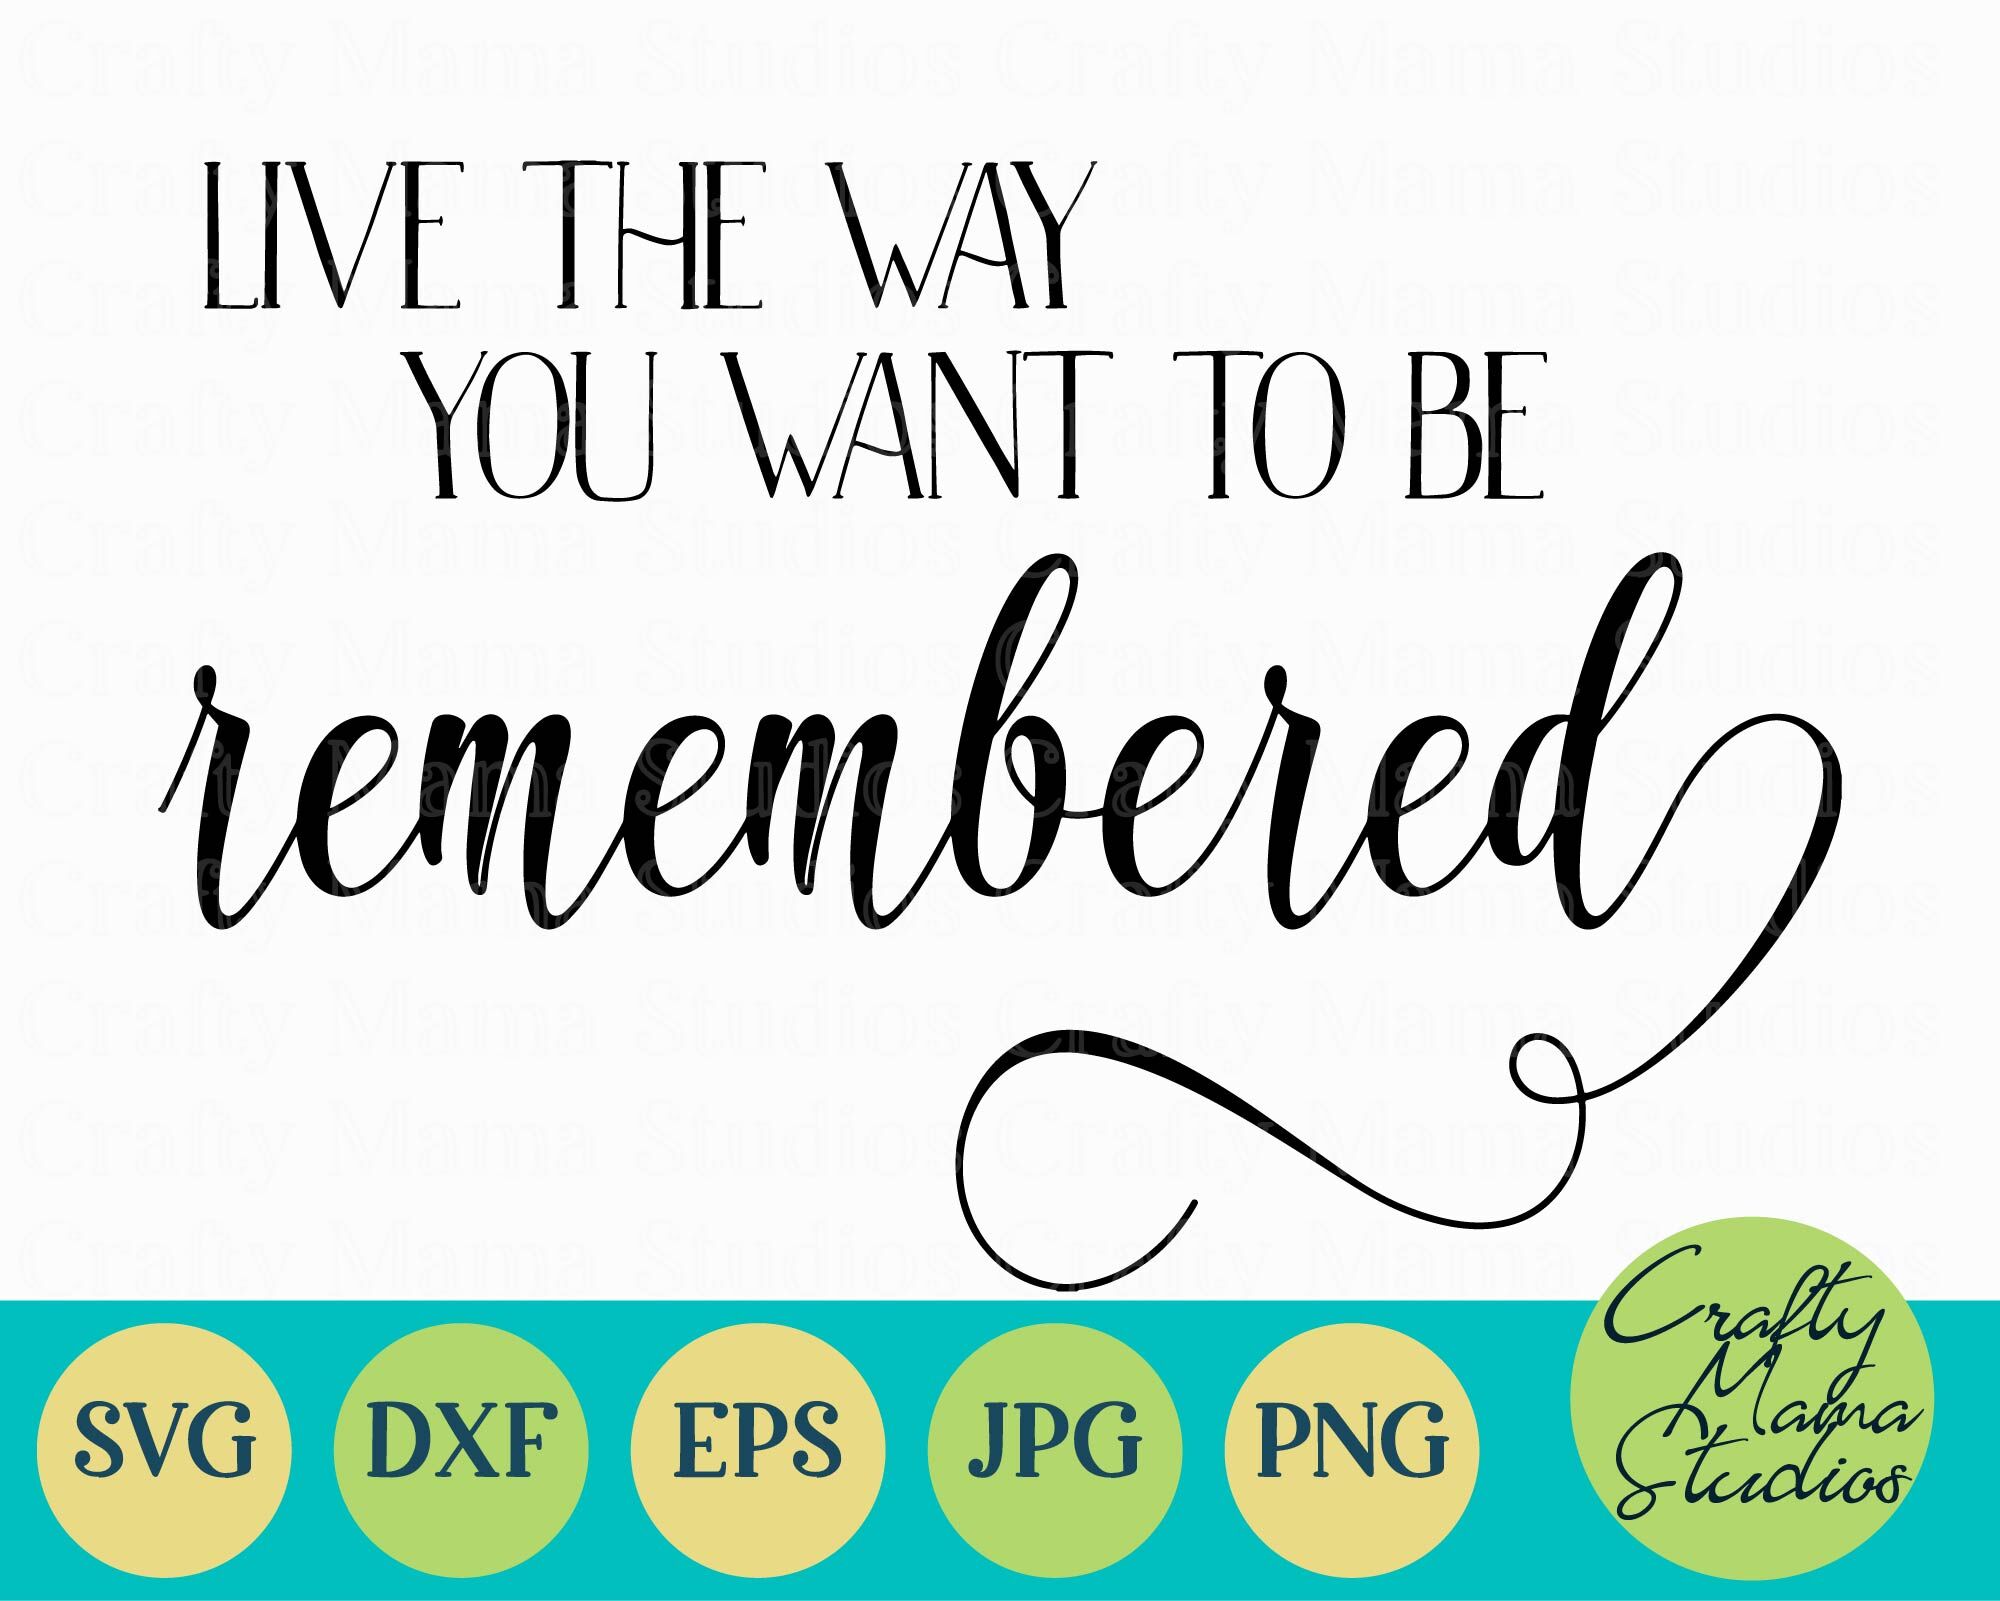 Live The Way You Want To Be Remembered Svg By Crafty Mama Studios Thehungryjpeg Com